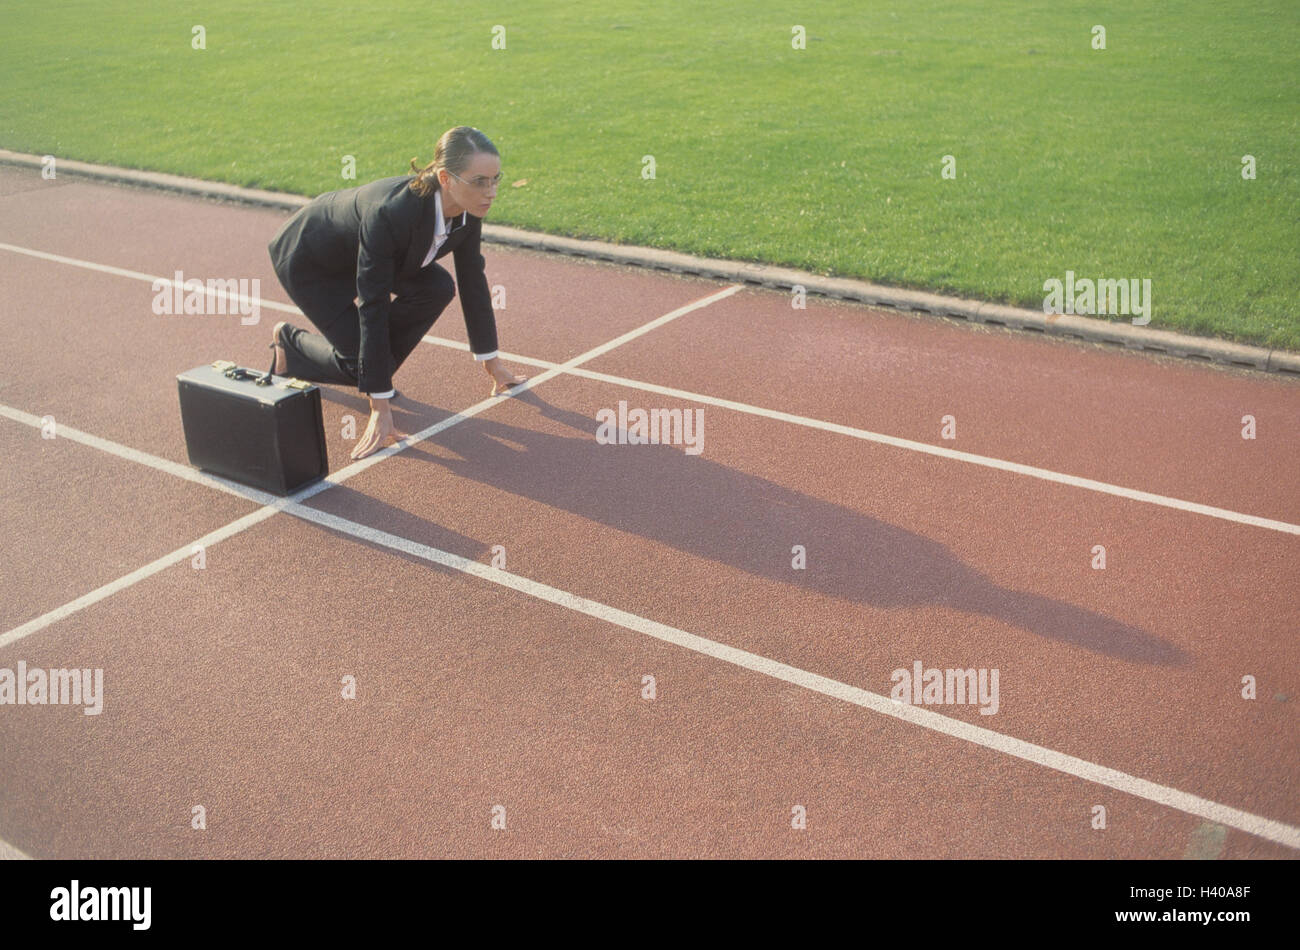 Dirt track, businesswoman, start position, briefcase, evening light, occupation, business, Tartanbahn, woman, manager, suit, career woman, briefcase, glasses, start, race, way to the success, ready for launch, ambitiously, energetically, purposefully, fut Stock Photo